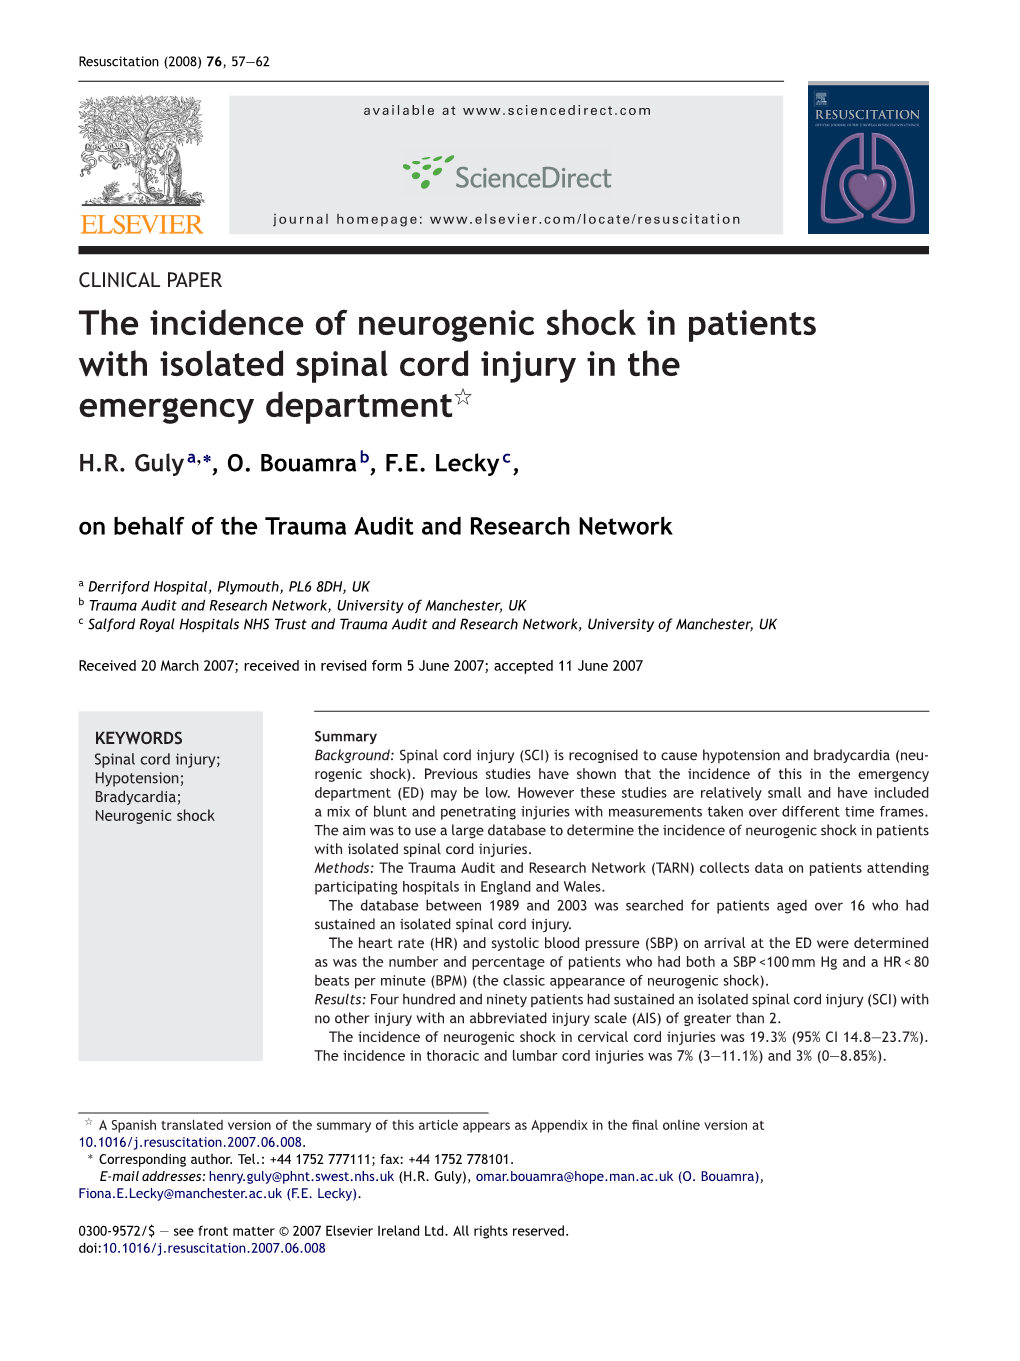 The Incidence of Neurogenic Shock in Patients with Isolated Spinal Cord Injury in the Emergency Departmentଝ